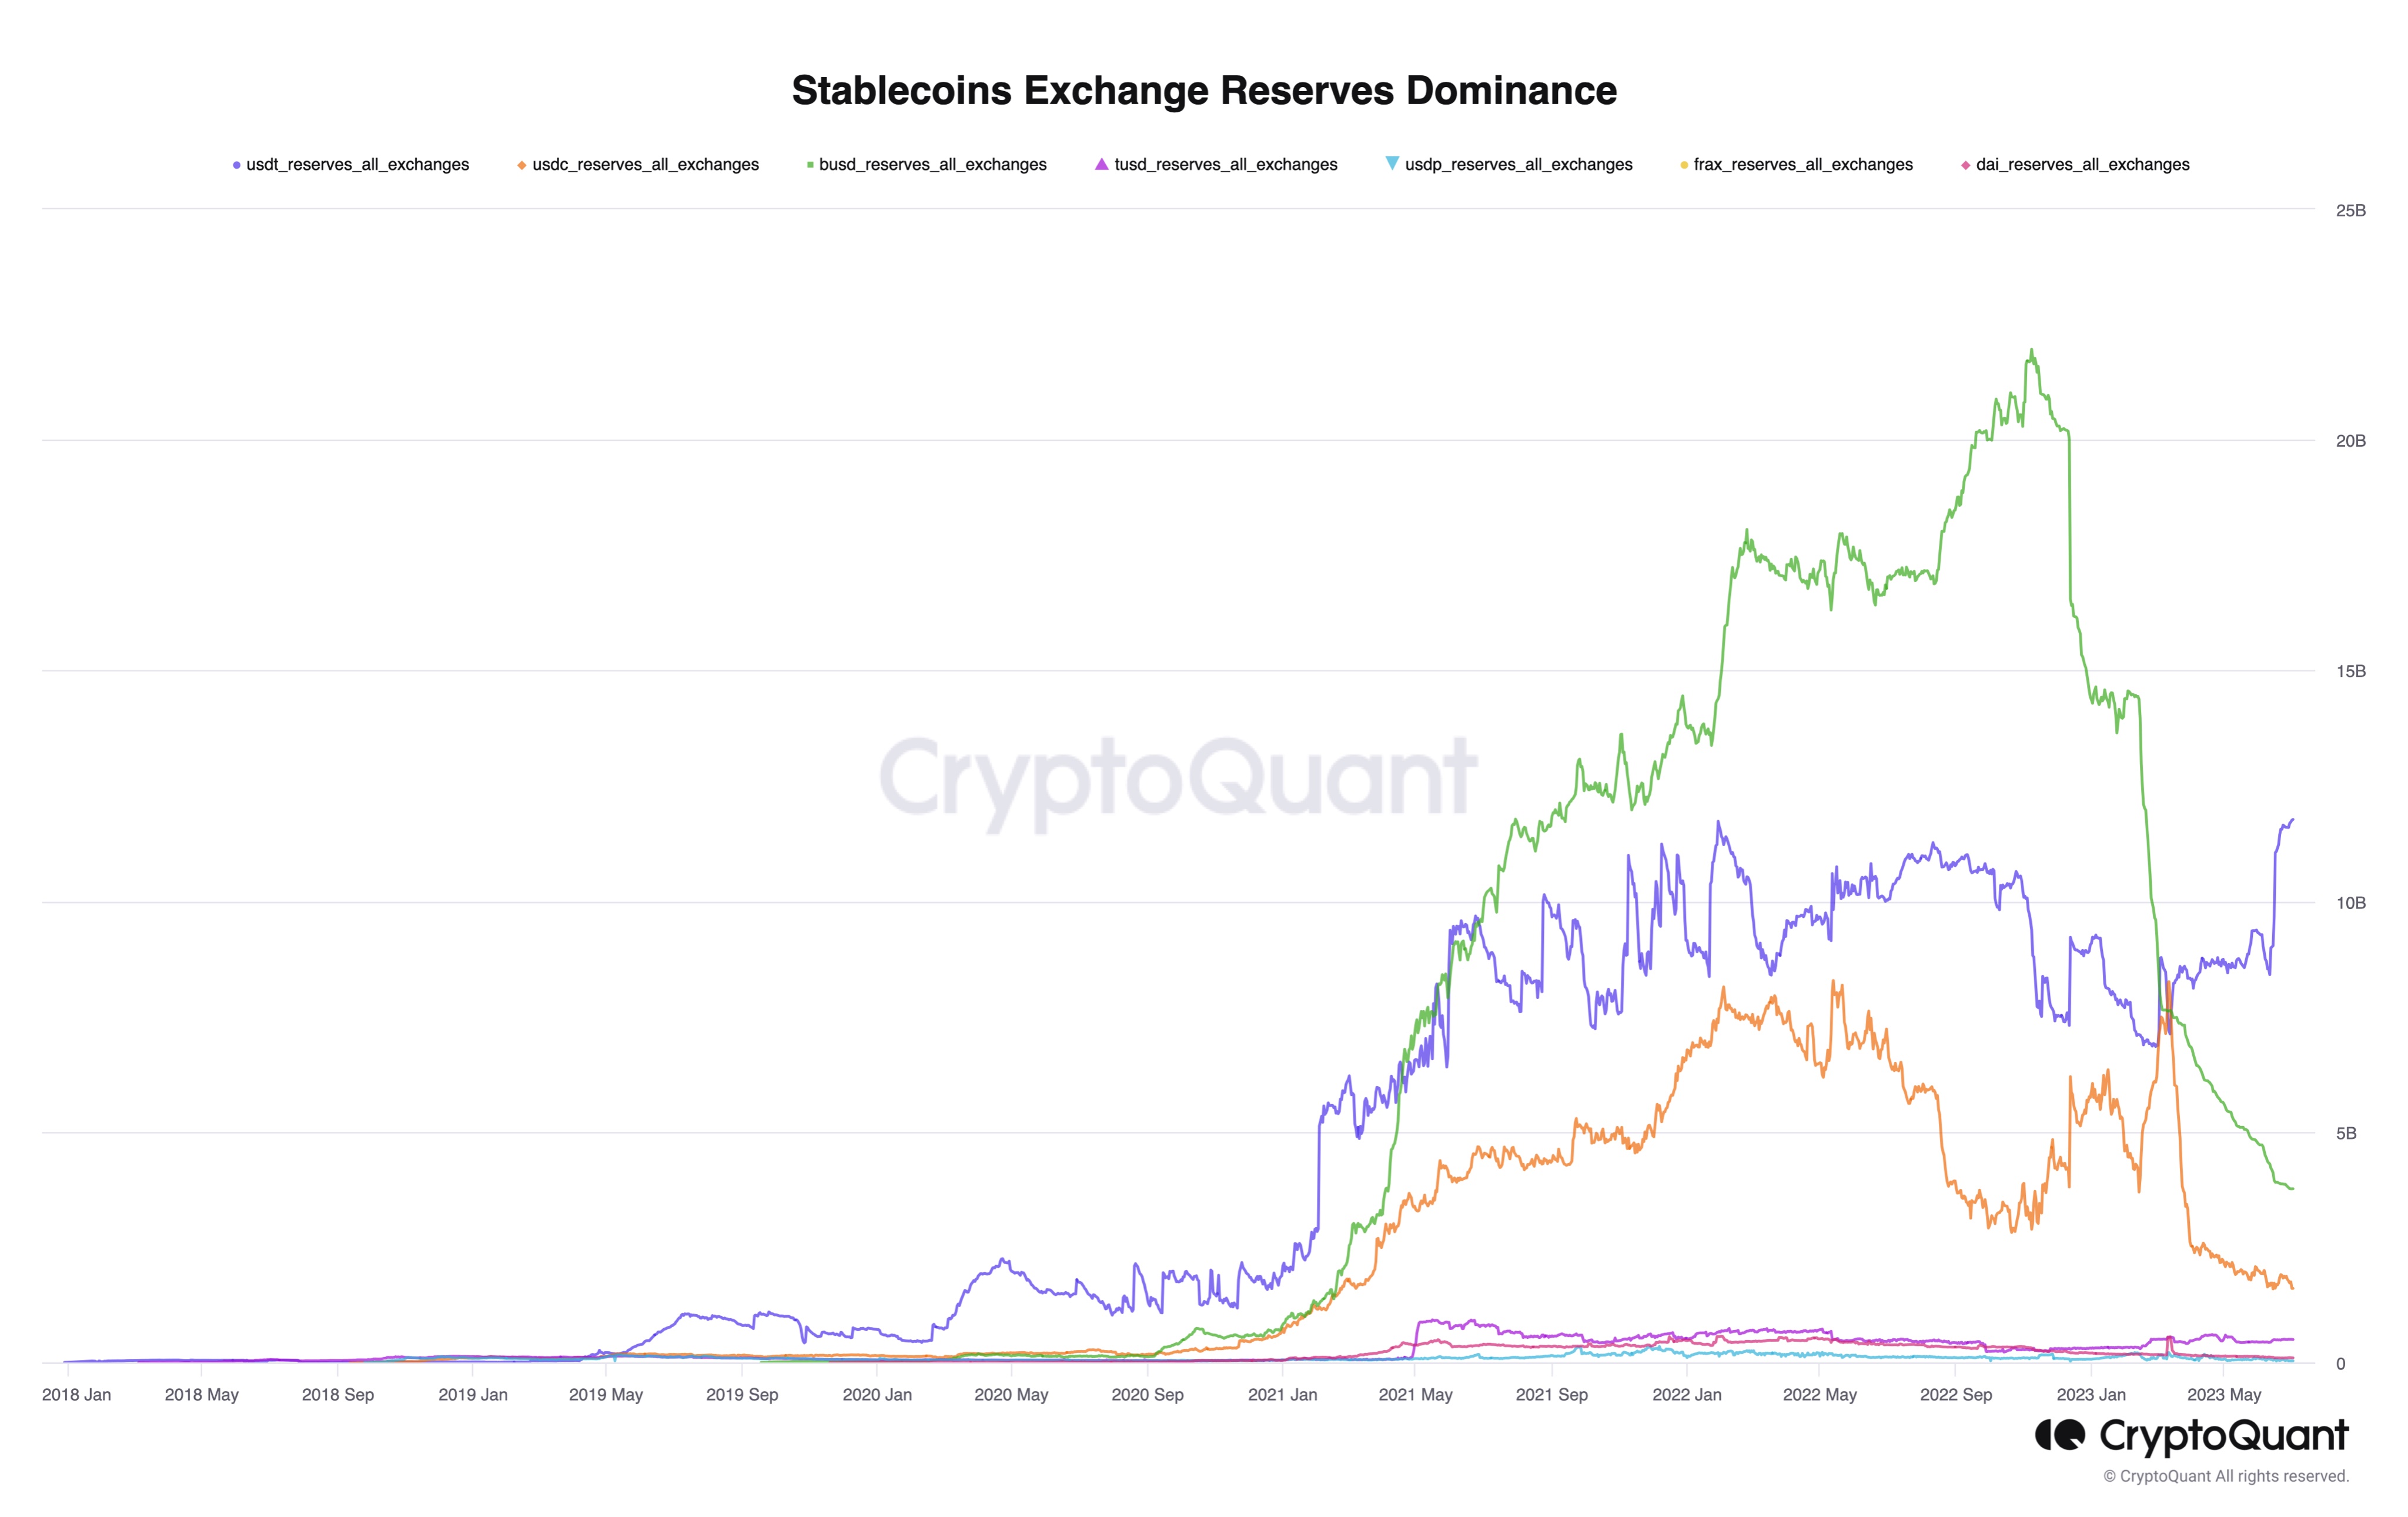 Stablecoin exchange reserves dominance